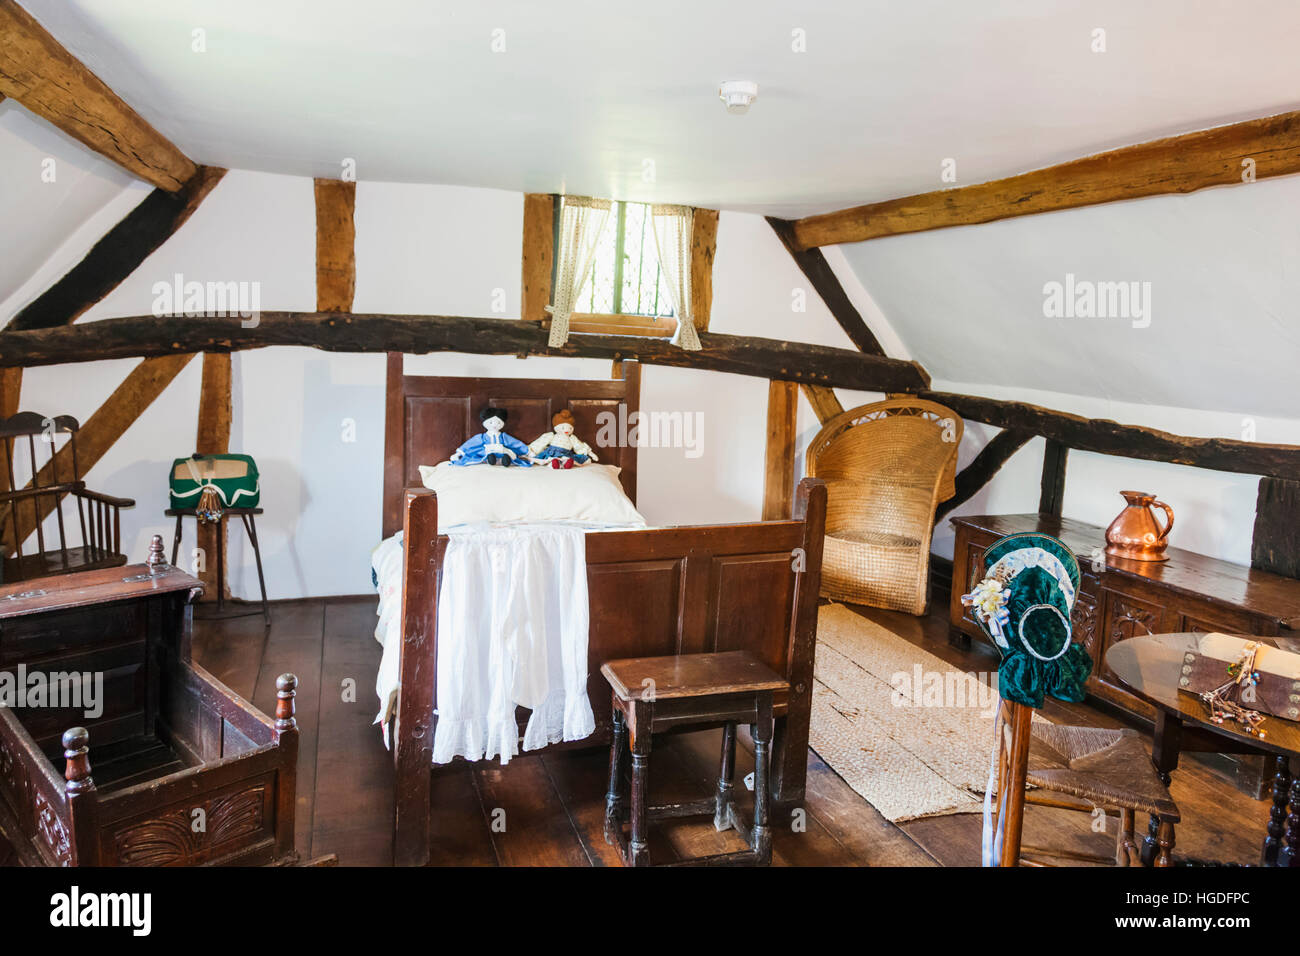 England, Warwickshire, Cotswolds, Stratford-Upon-Avon, Anne Hathaway's Cottage, Bedroom Stock Photo